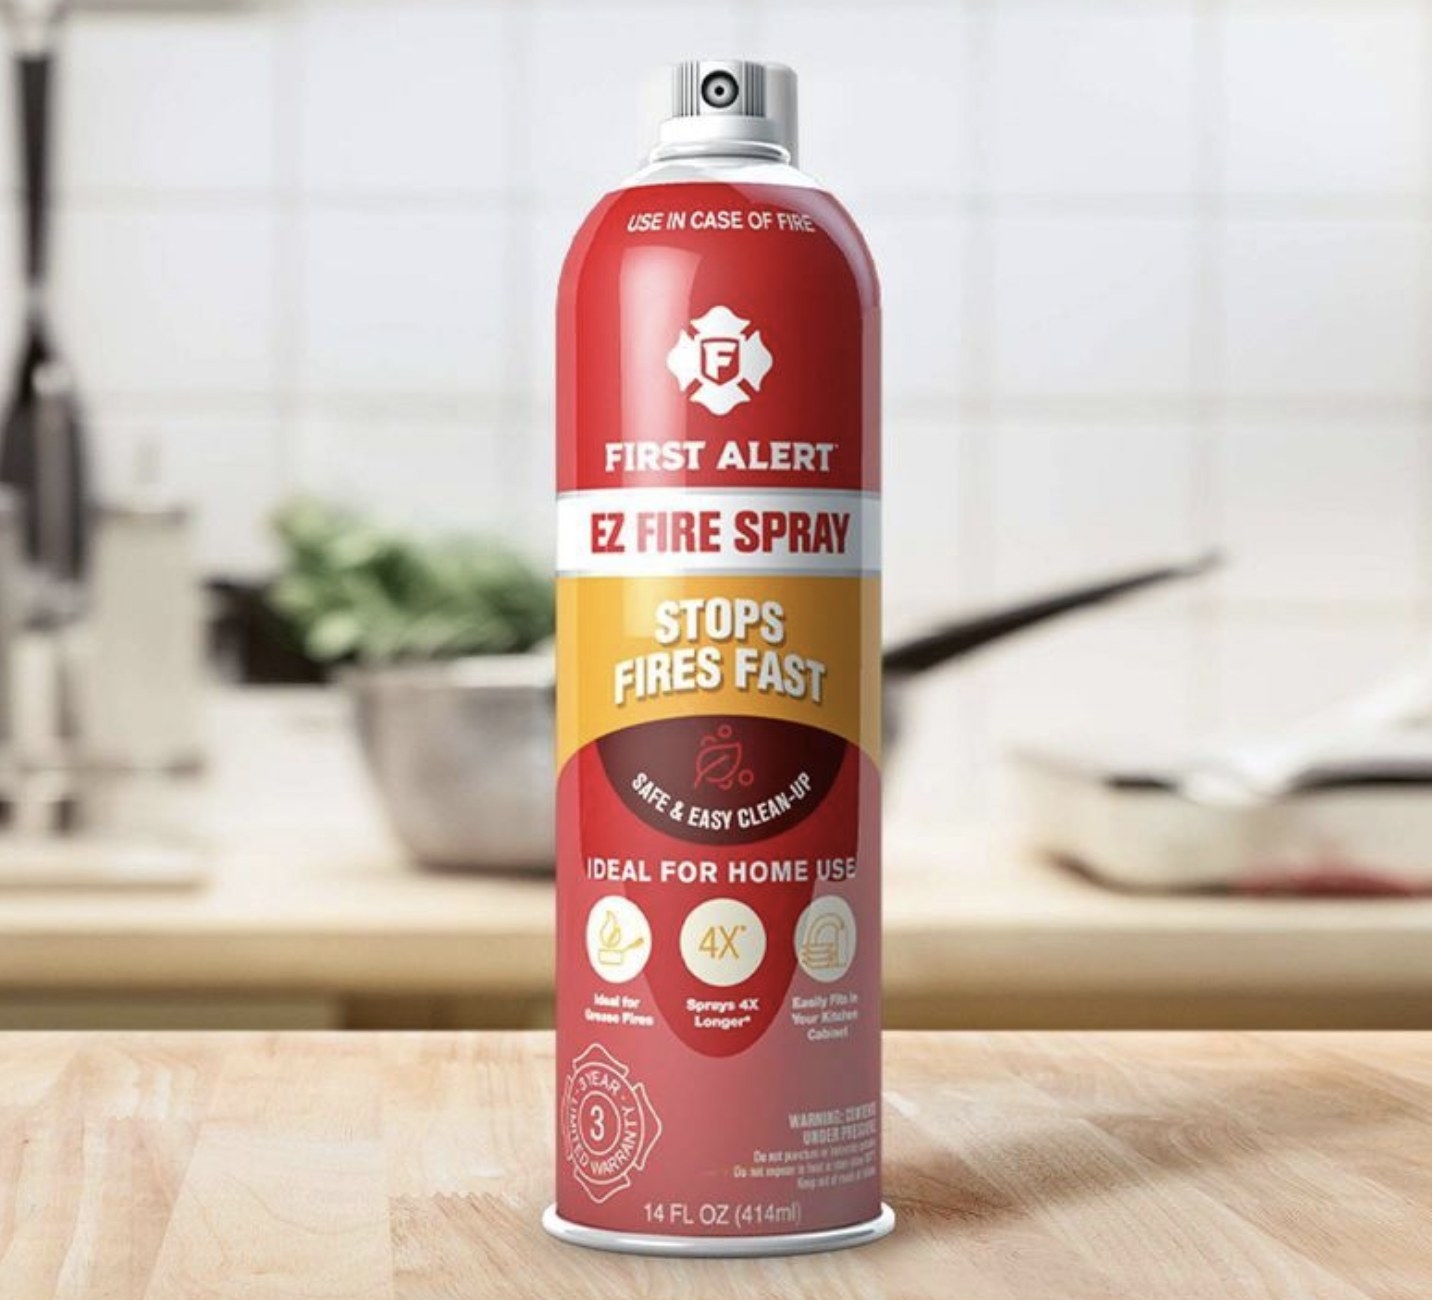 A can of fire extinguisher spray